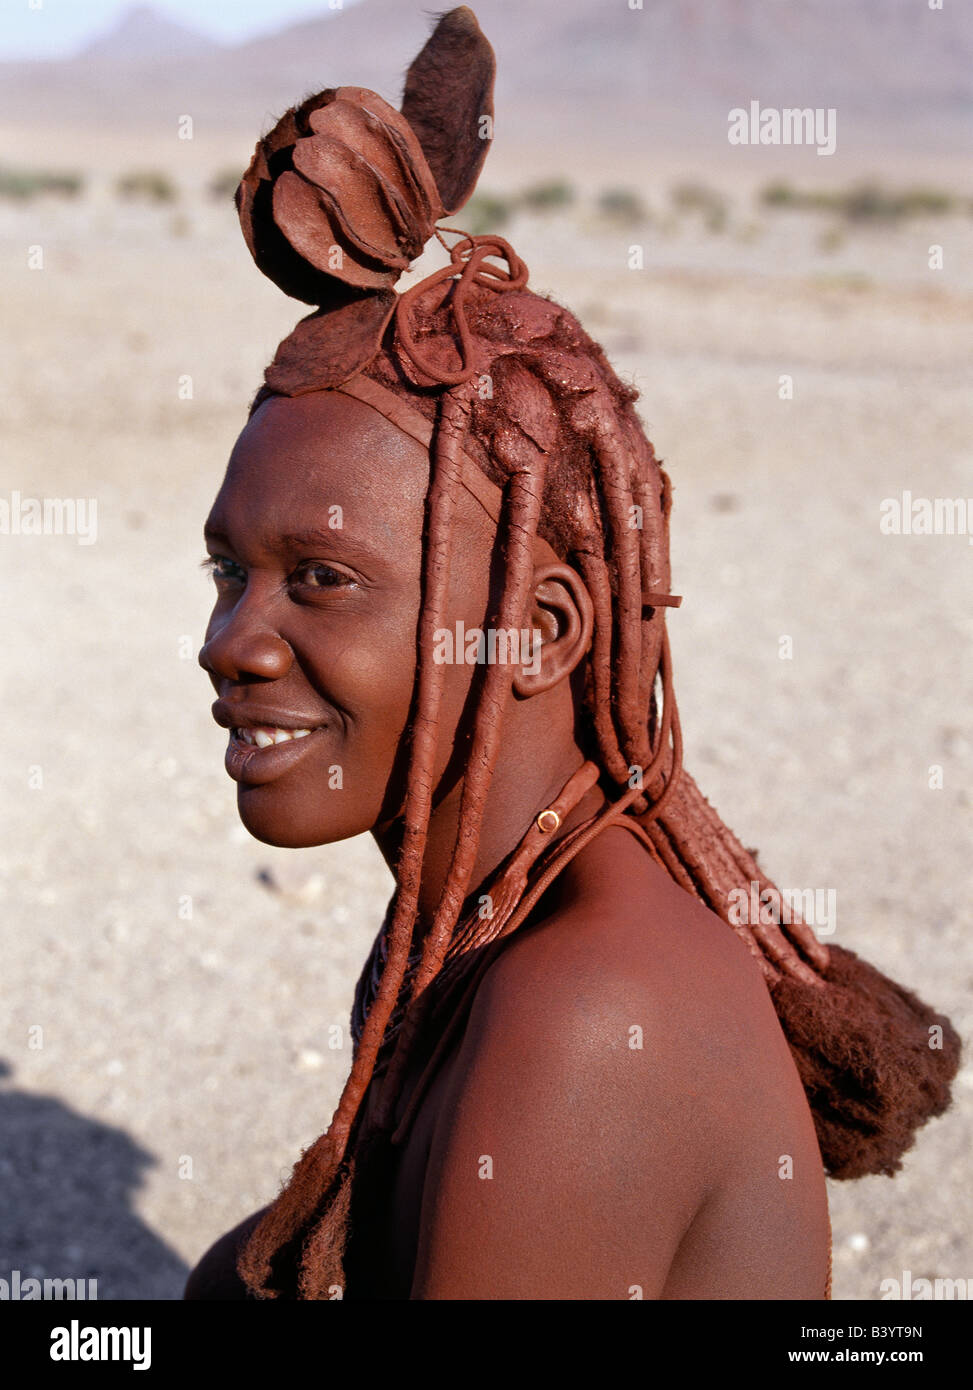 Namibia, Kaokoland, Purros. A Himba woman in traditional attire. Her body gleams from a mixture of red ochre, butterfat and herbs. Her long hair is styled in the traditional Himba way and is crowned with a headdress made of lambskin, called erembe.The Himba are Herero-speaking Bantu nomads who live in the harsh, dry but starkly beautiful landscape of remote northwest Namibia. Stock Photo